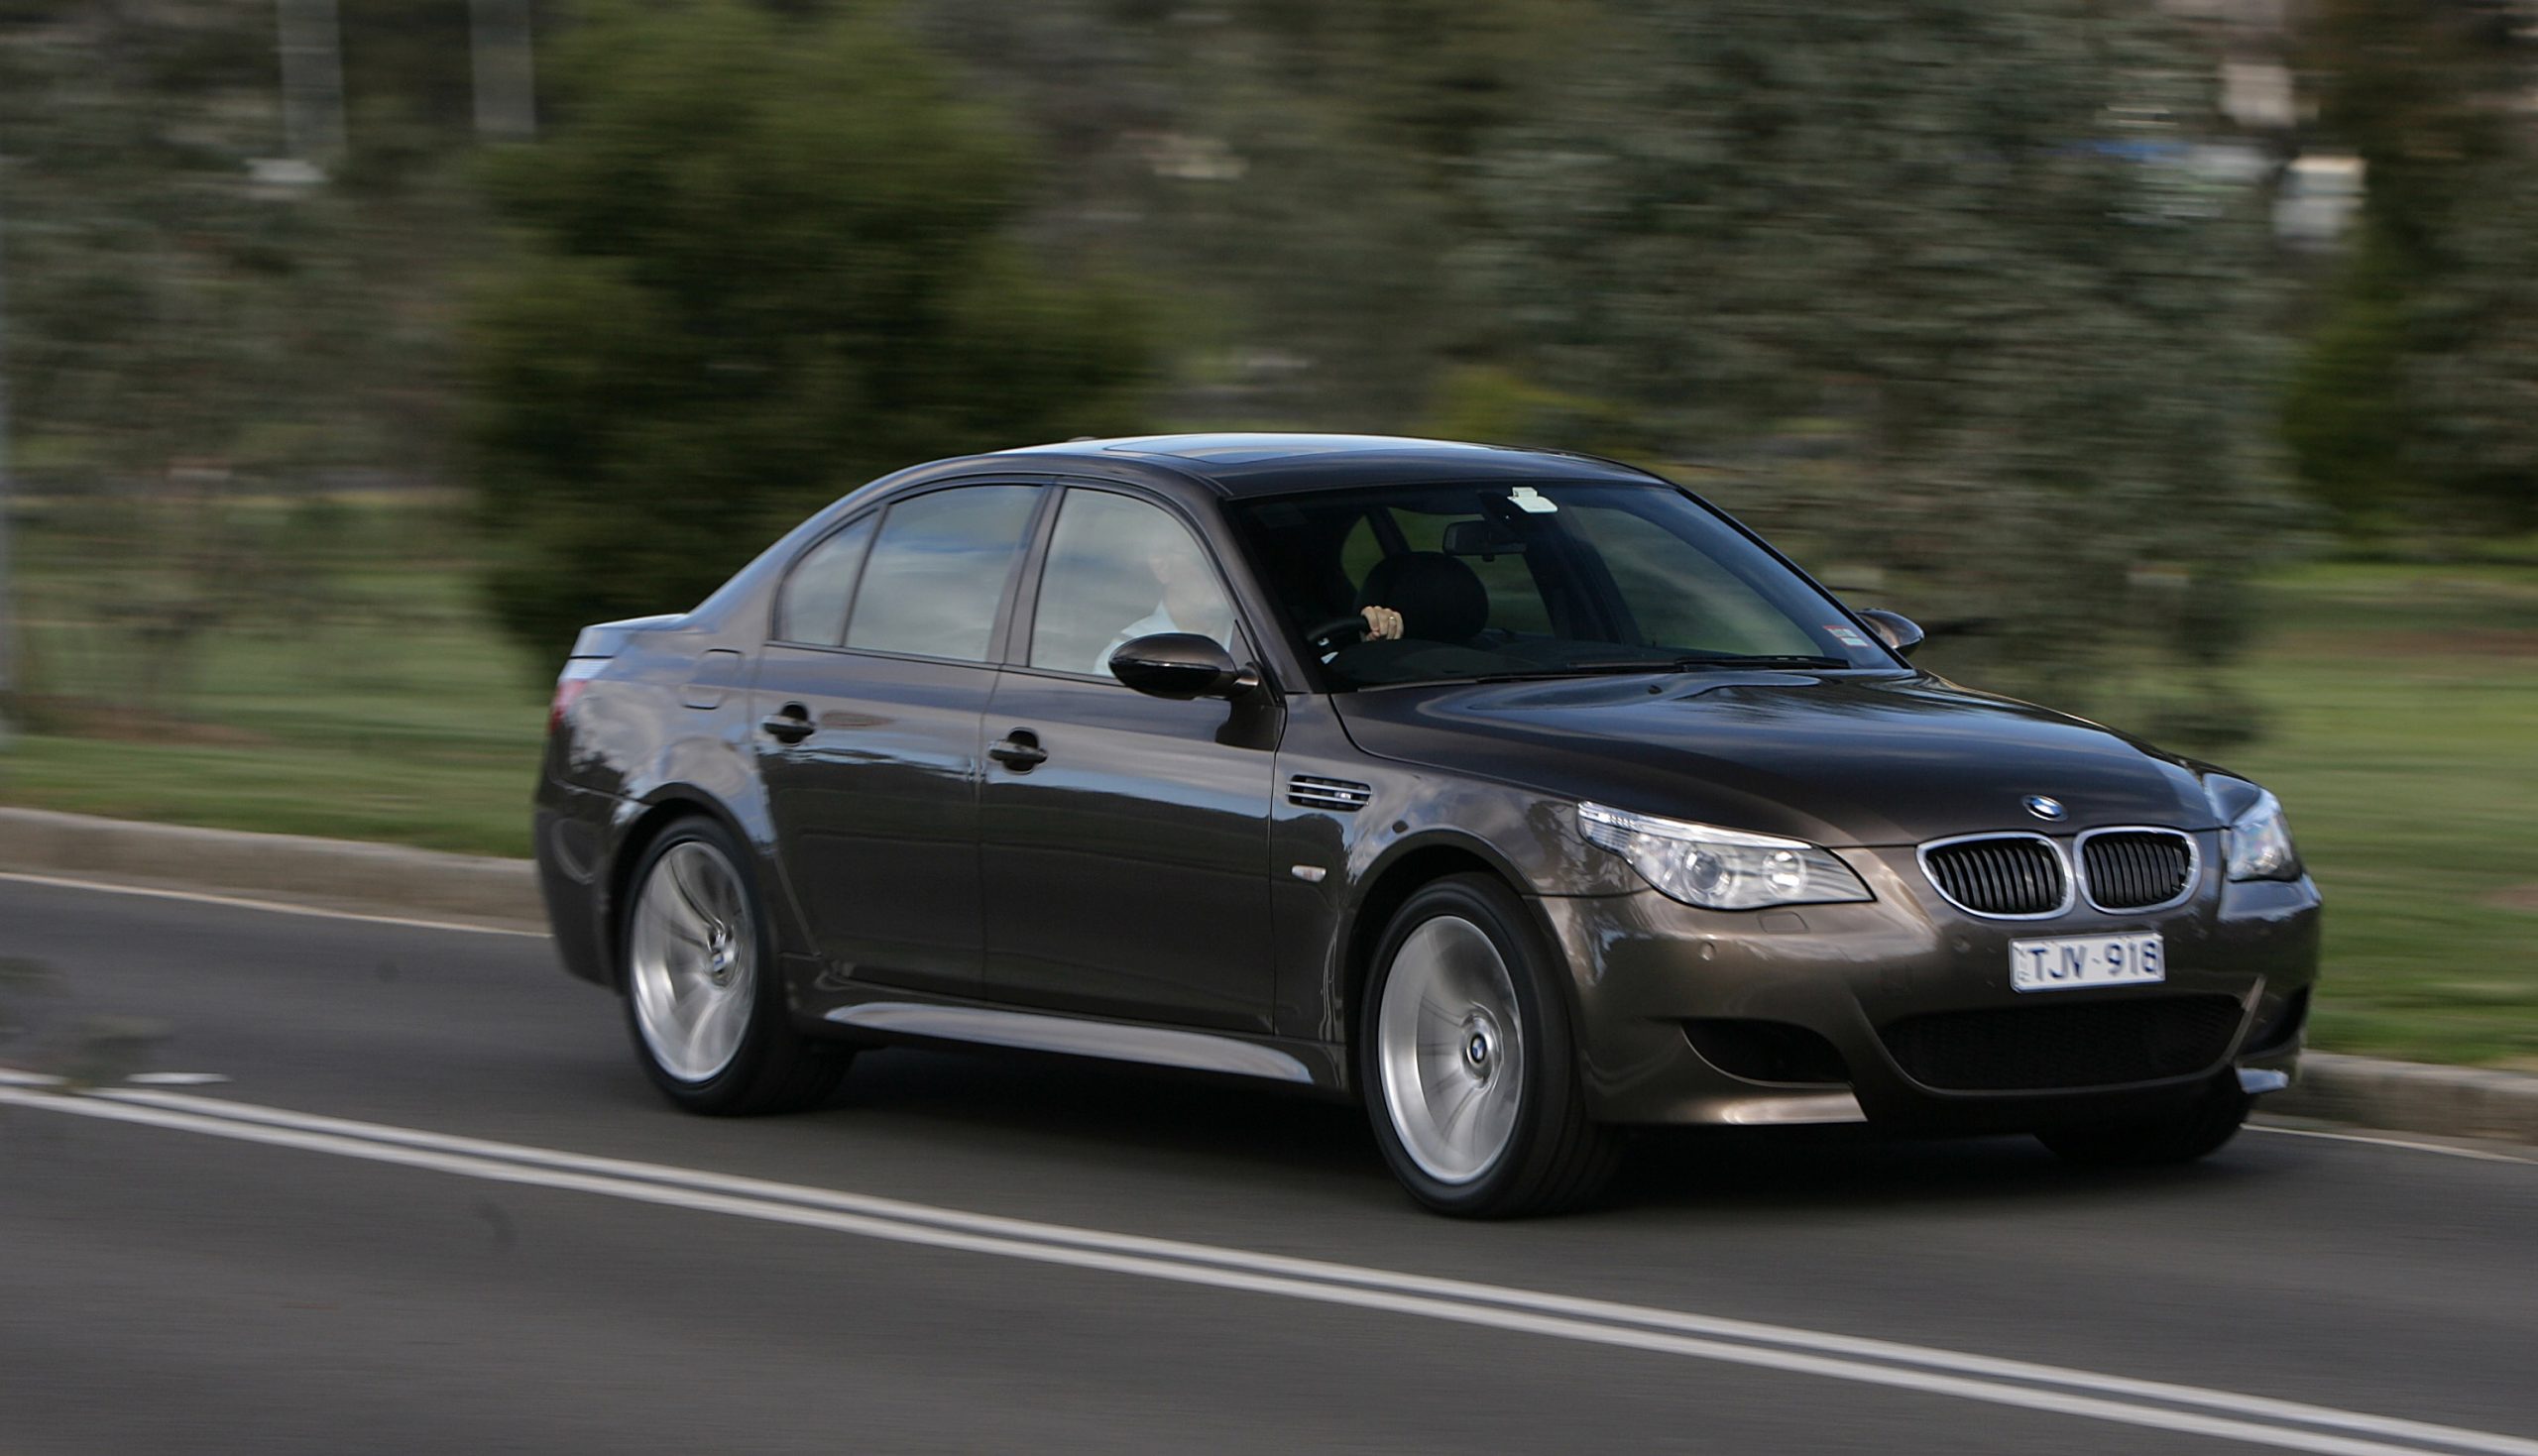 A brown 2005 E60 BMW M5 sports car driving down the road at speed